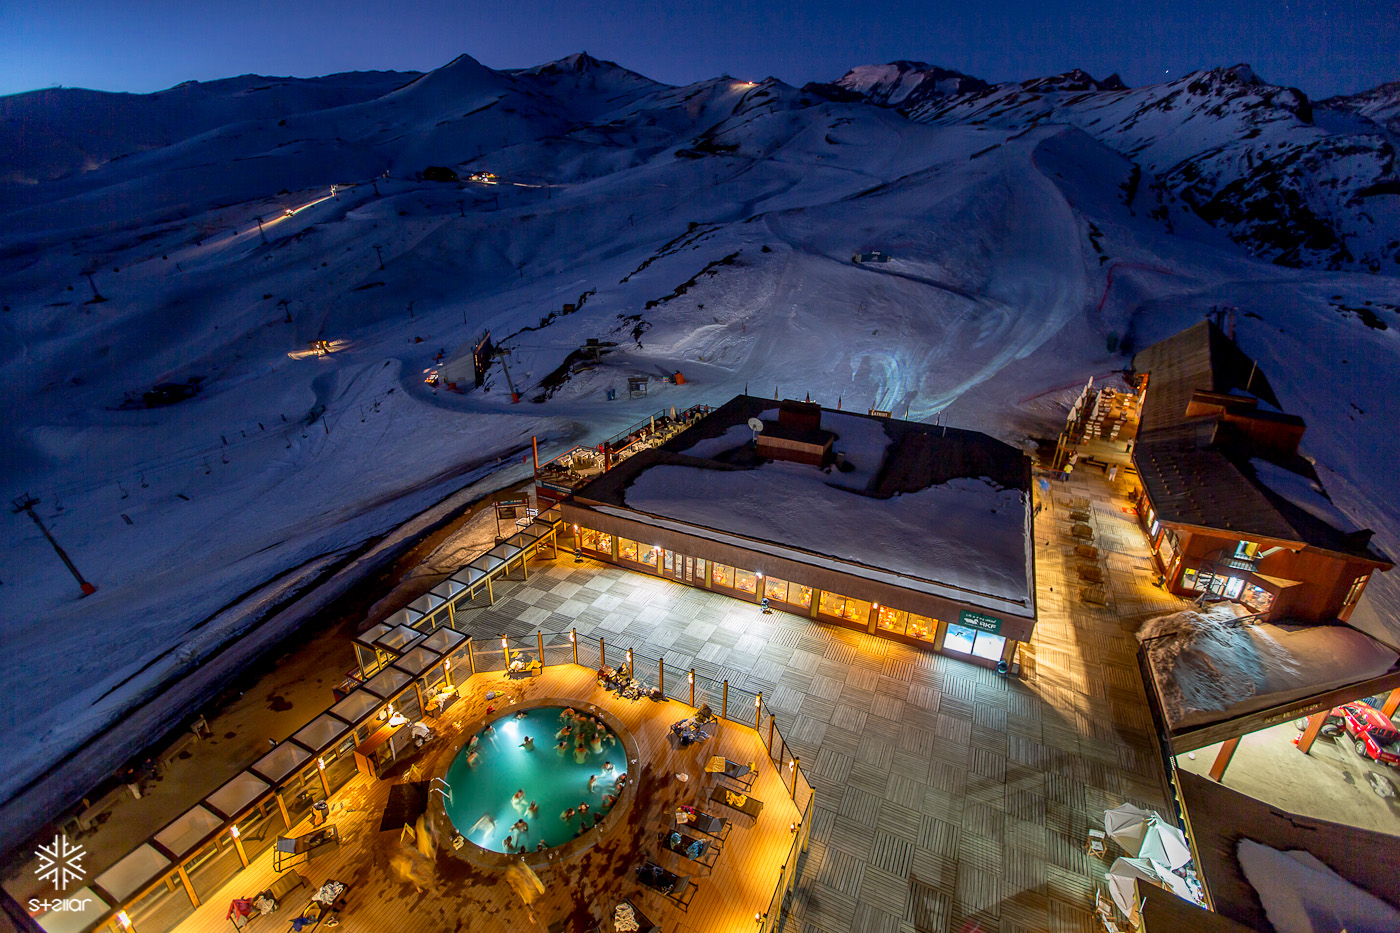 Photo: Valle Nevado Resort is only 90 minutes away from downtown Santiago and represents the countries most luxurious ski resort for all abilities. Relax in a high altitude hot tub with cold beer in hand while enjoying views of El Plomo (17,735ft). 